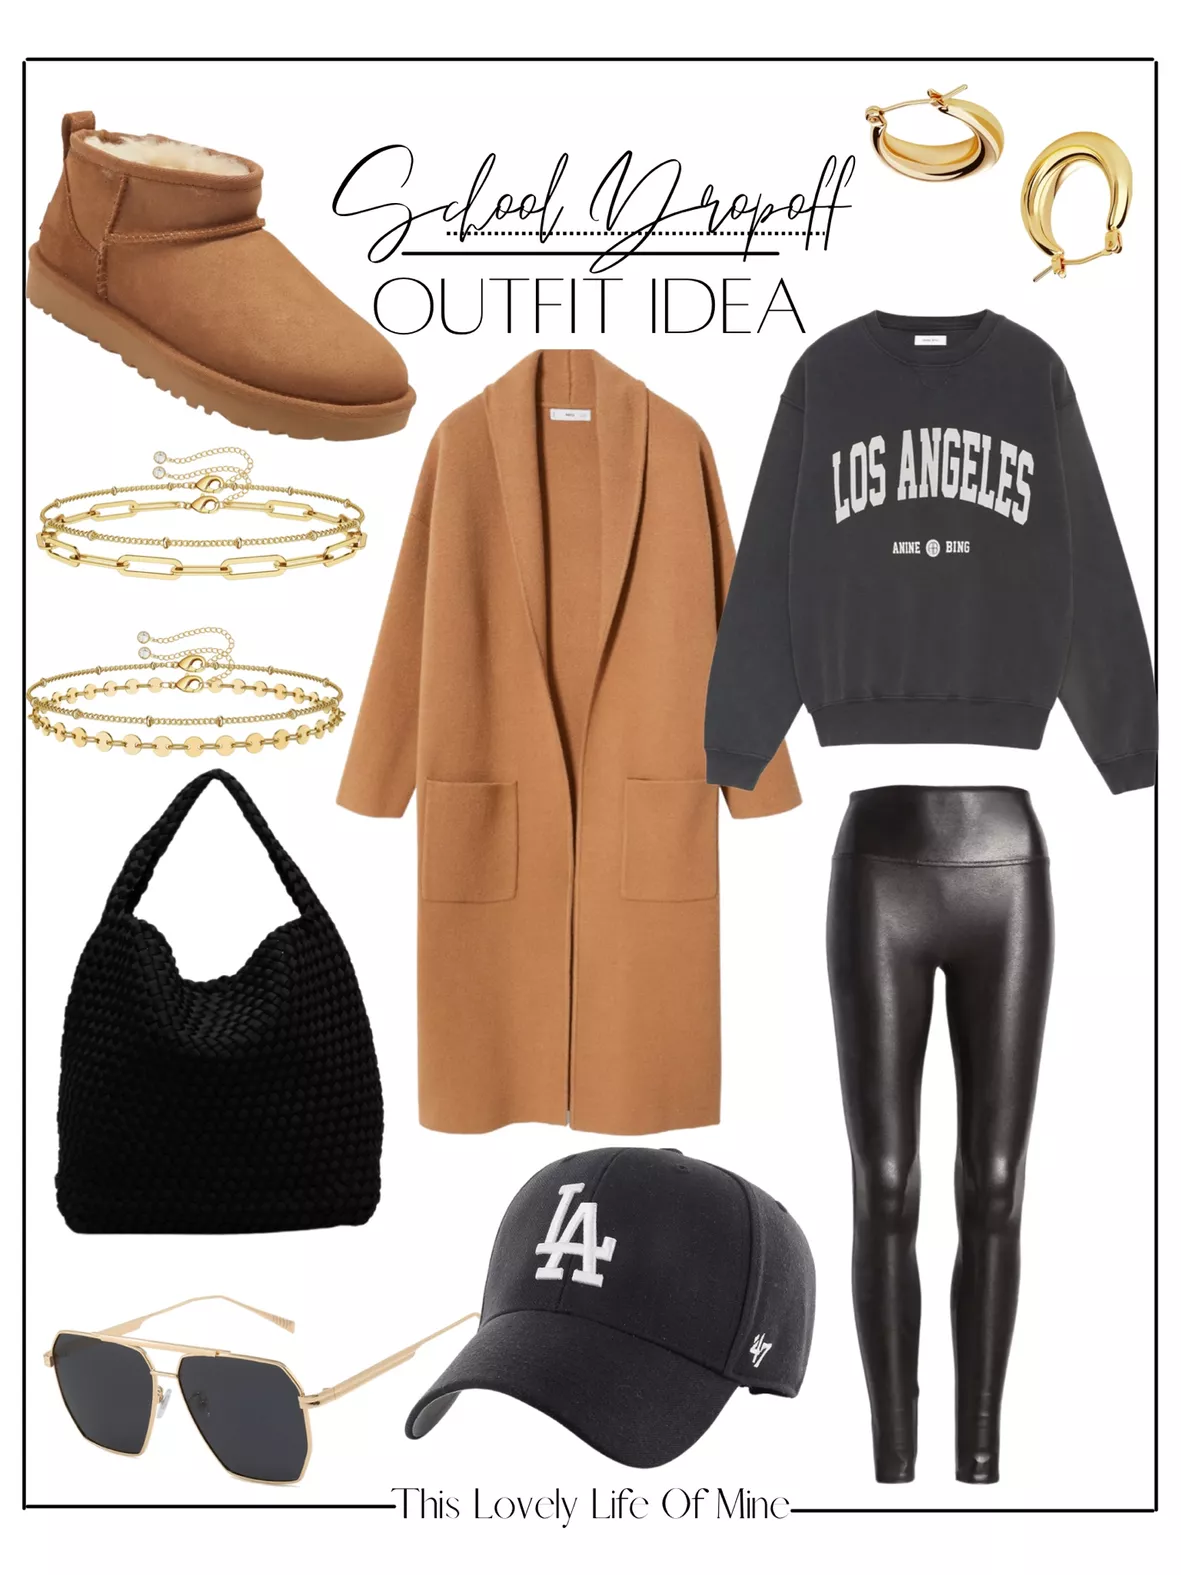 dodgers game outfit idea - My Styled Life